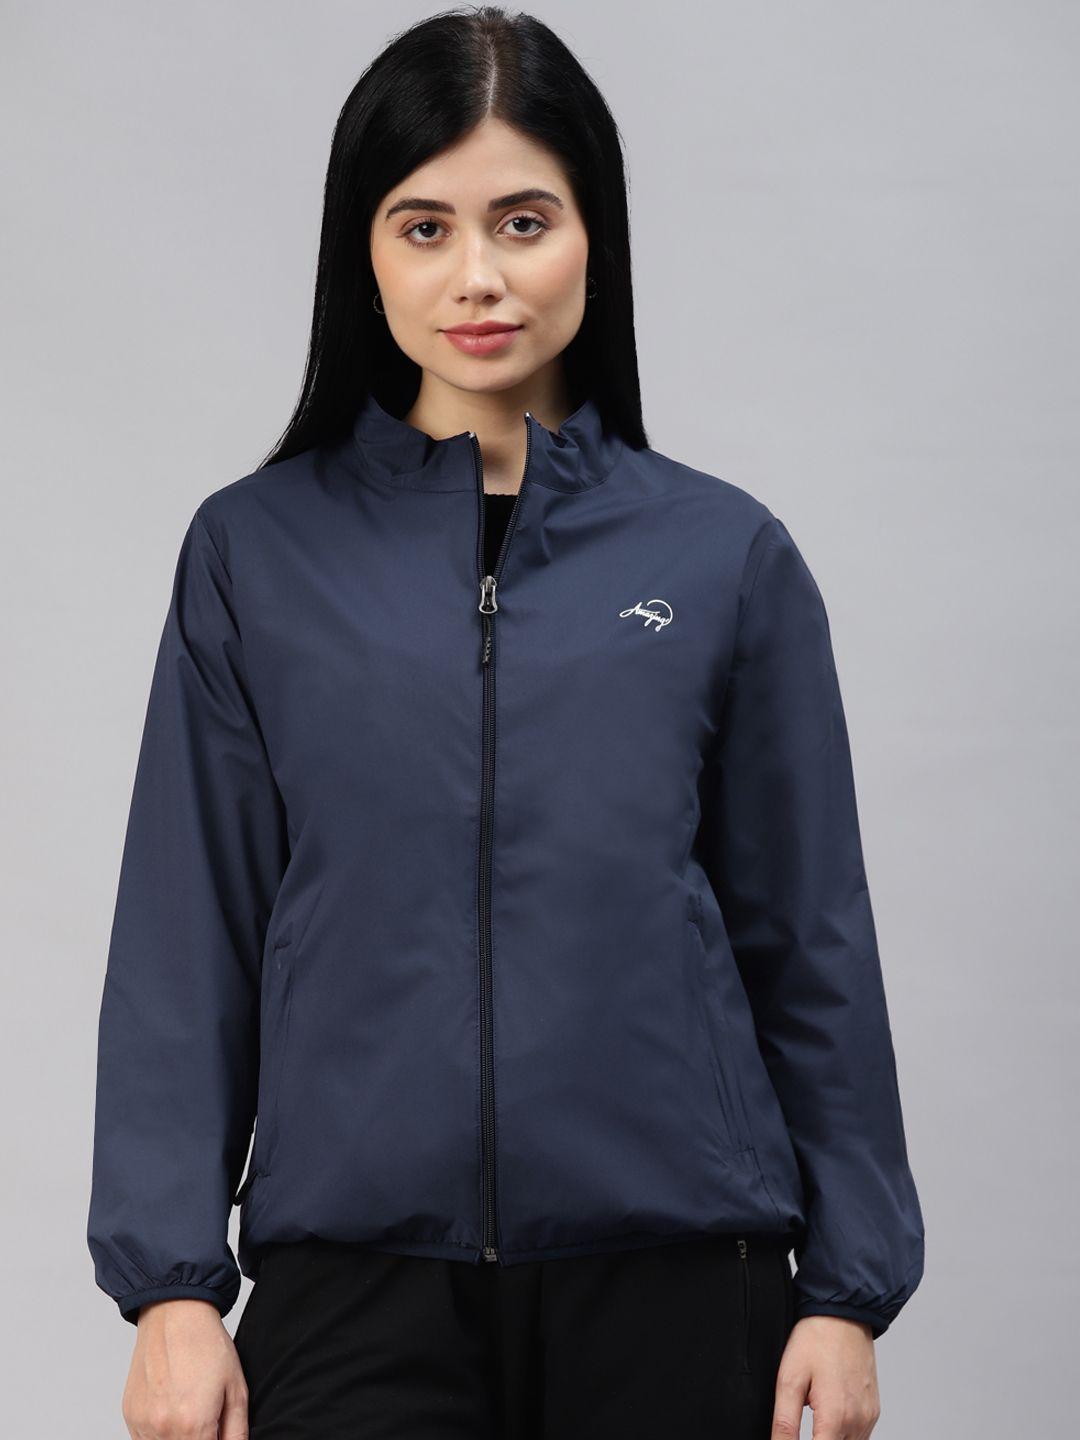 foreign culture by fort collins women navy blue windcheater tailored jacket